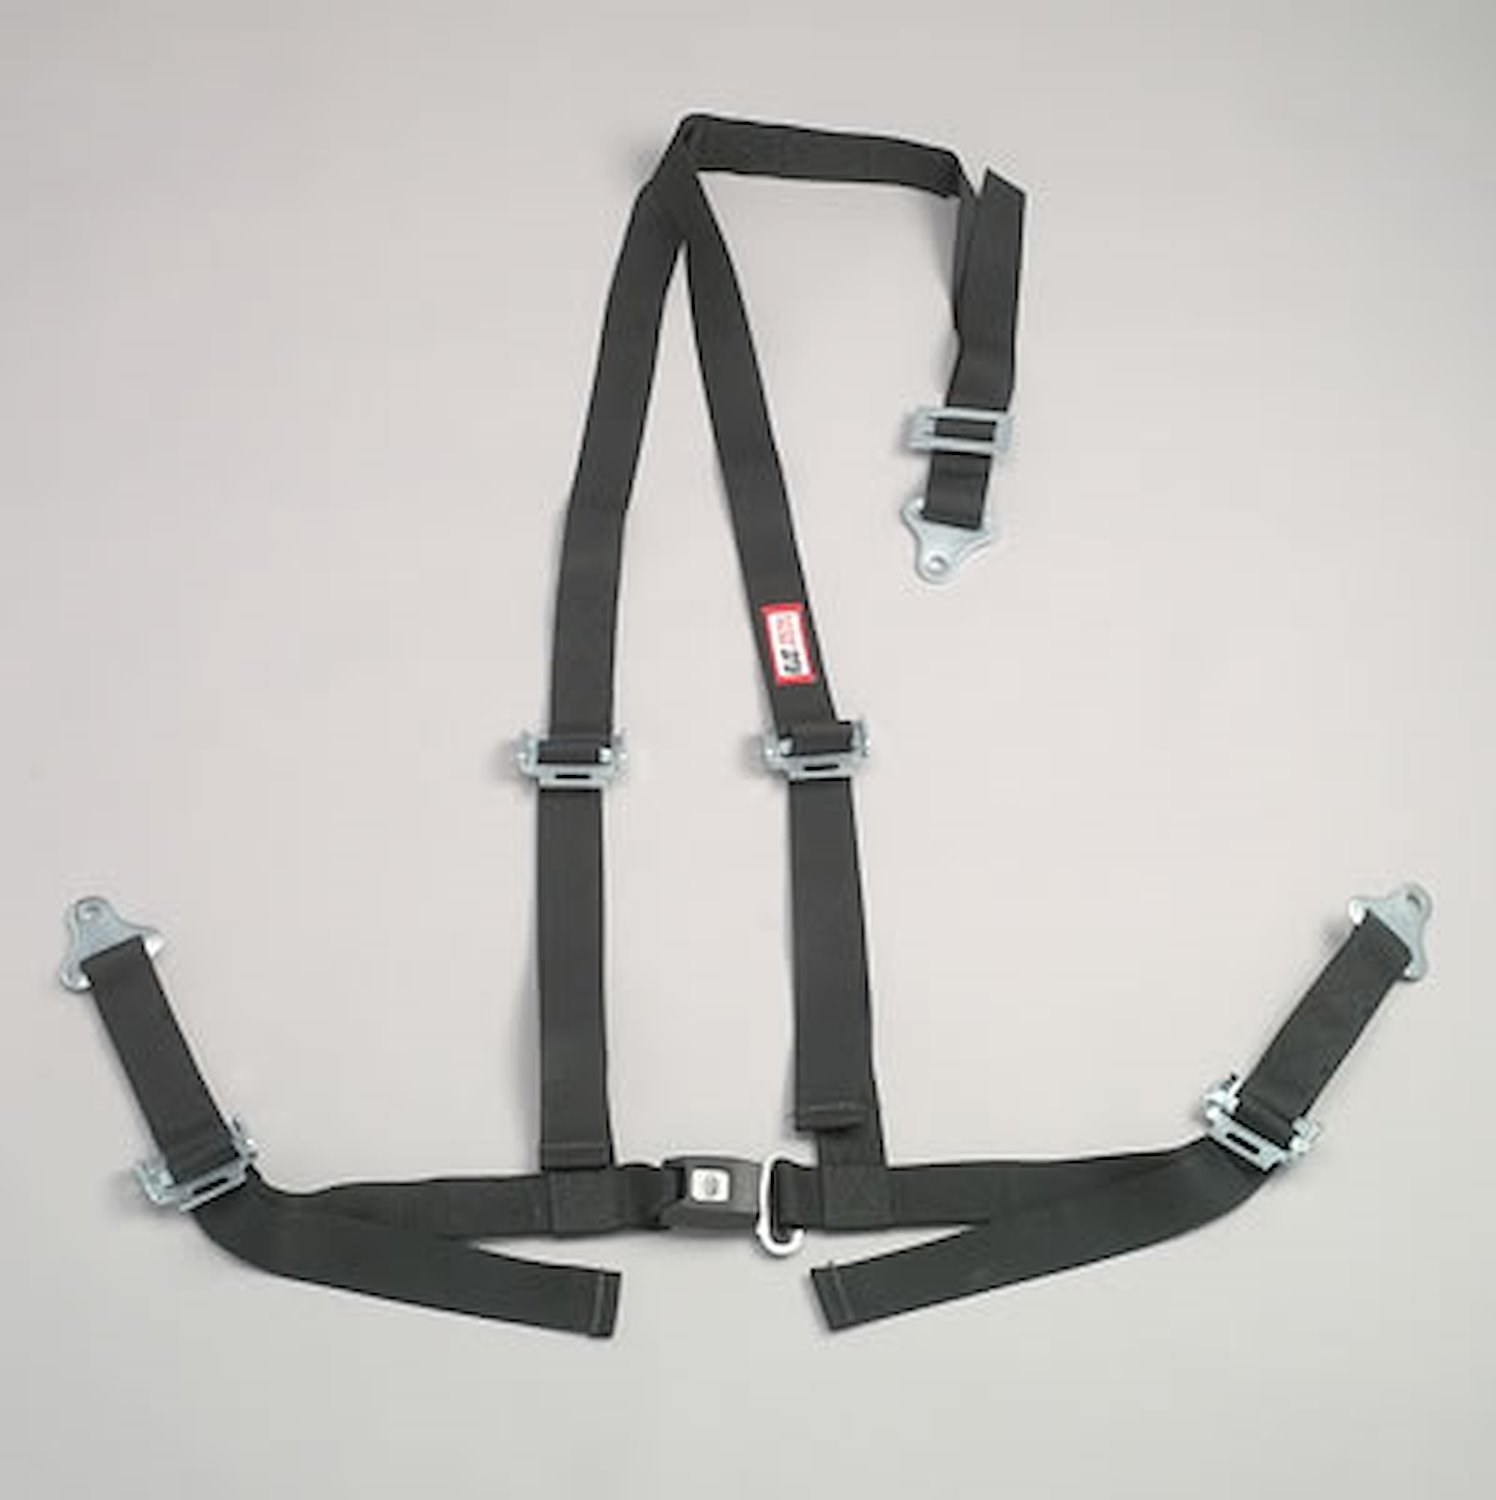 NON-SFI B&T HARNESS 2 PULL UP Lap Belt 2 S. H. Individual FLOOR Mount ALL WRAP ENDS w/STERNUM STRAP YELLOW